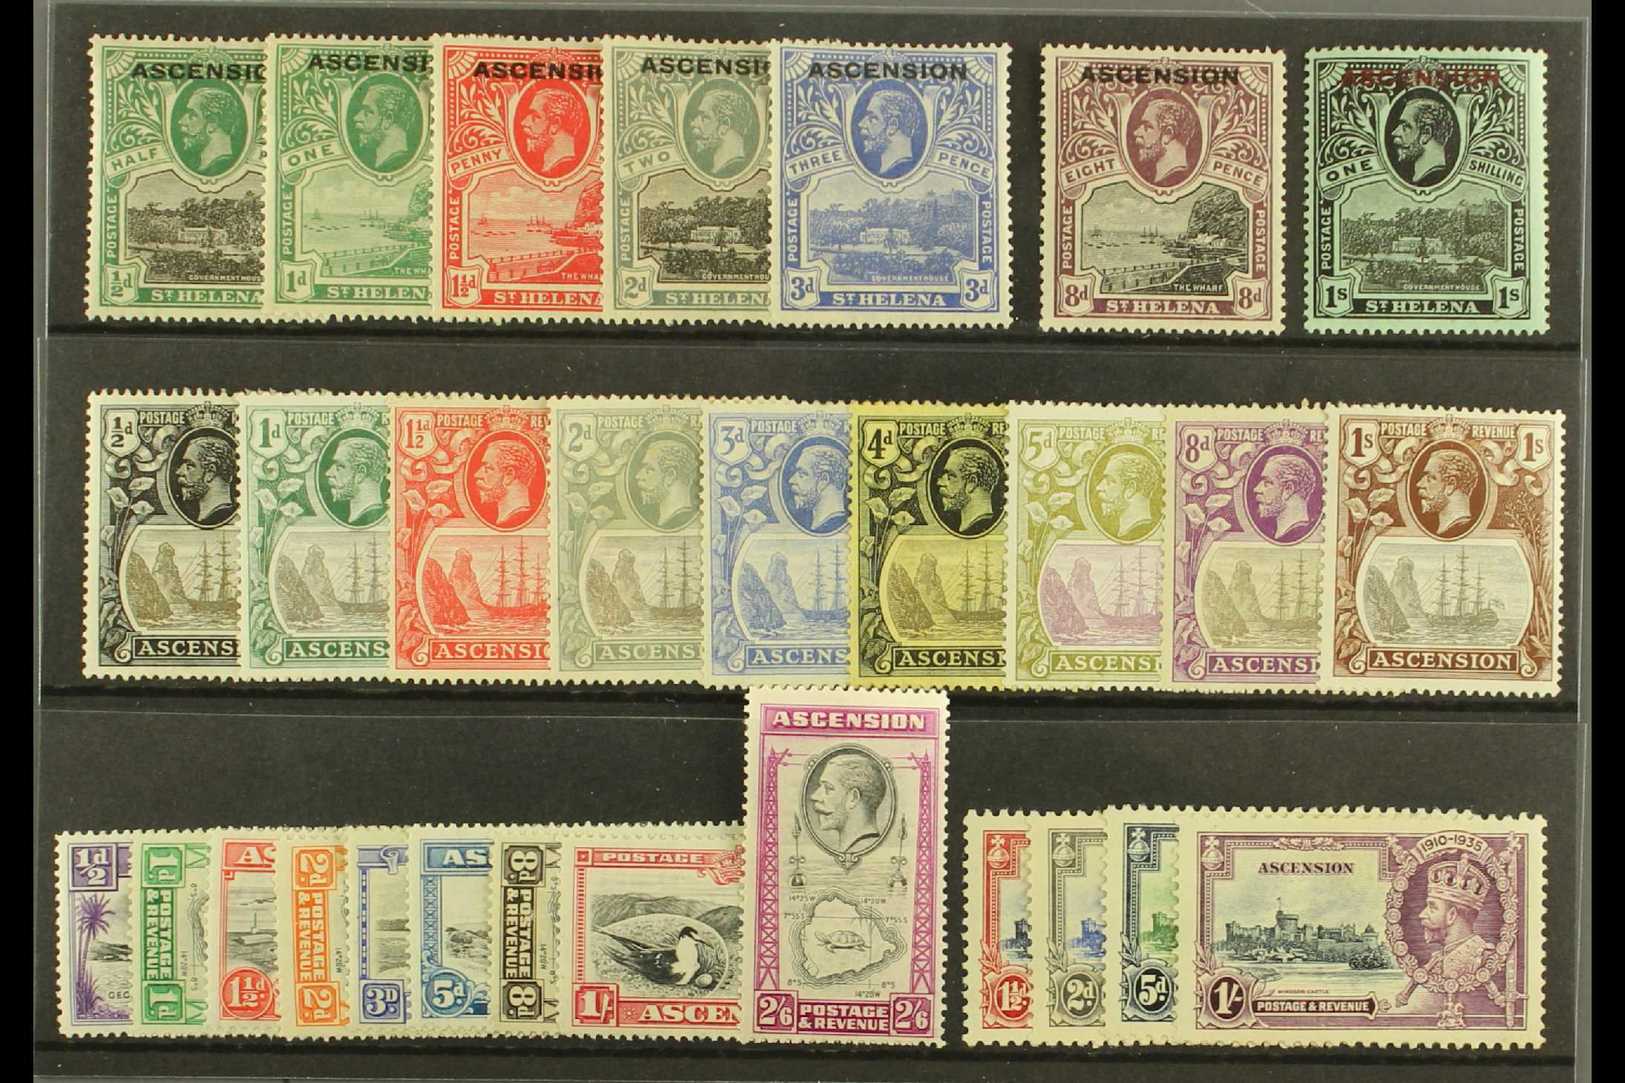 1922-36 KGV MINT GROUP  Includes 1922  ½d, 1d, 1½d, 3d, 8d, And 1s, 1924-33 "Badge" Set Of One Of Each Value From ½d To  - Ascension (Ile De L')